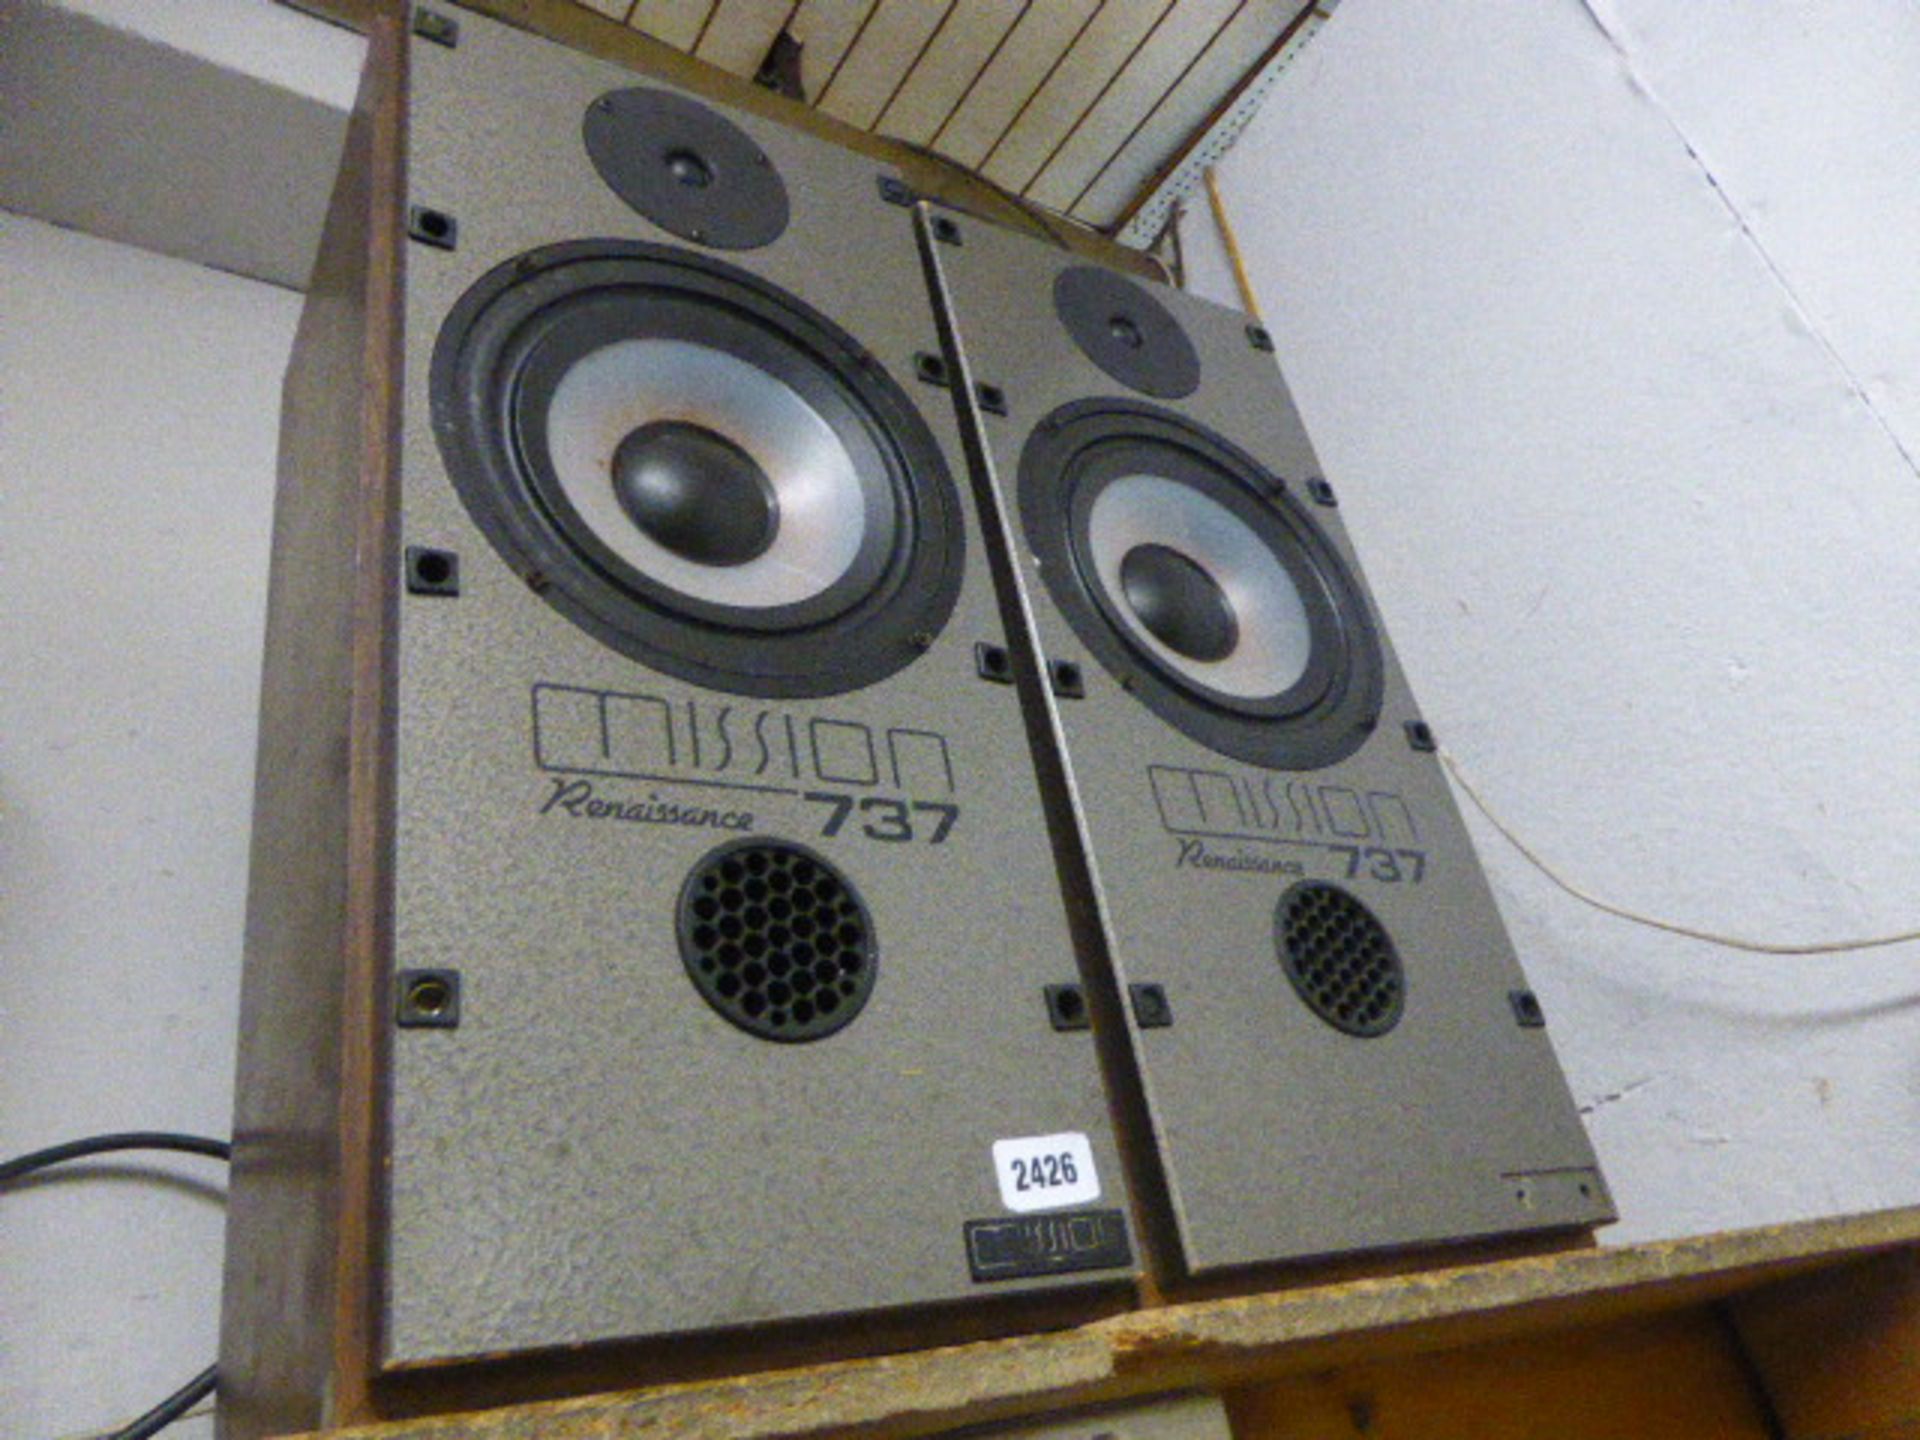 Two Mission renaissance 737 speakers no front covers